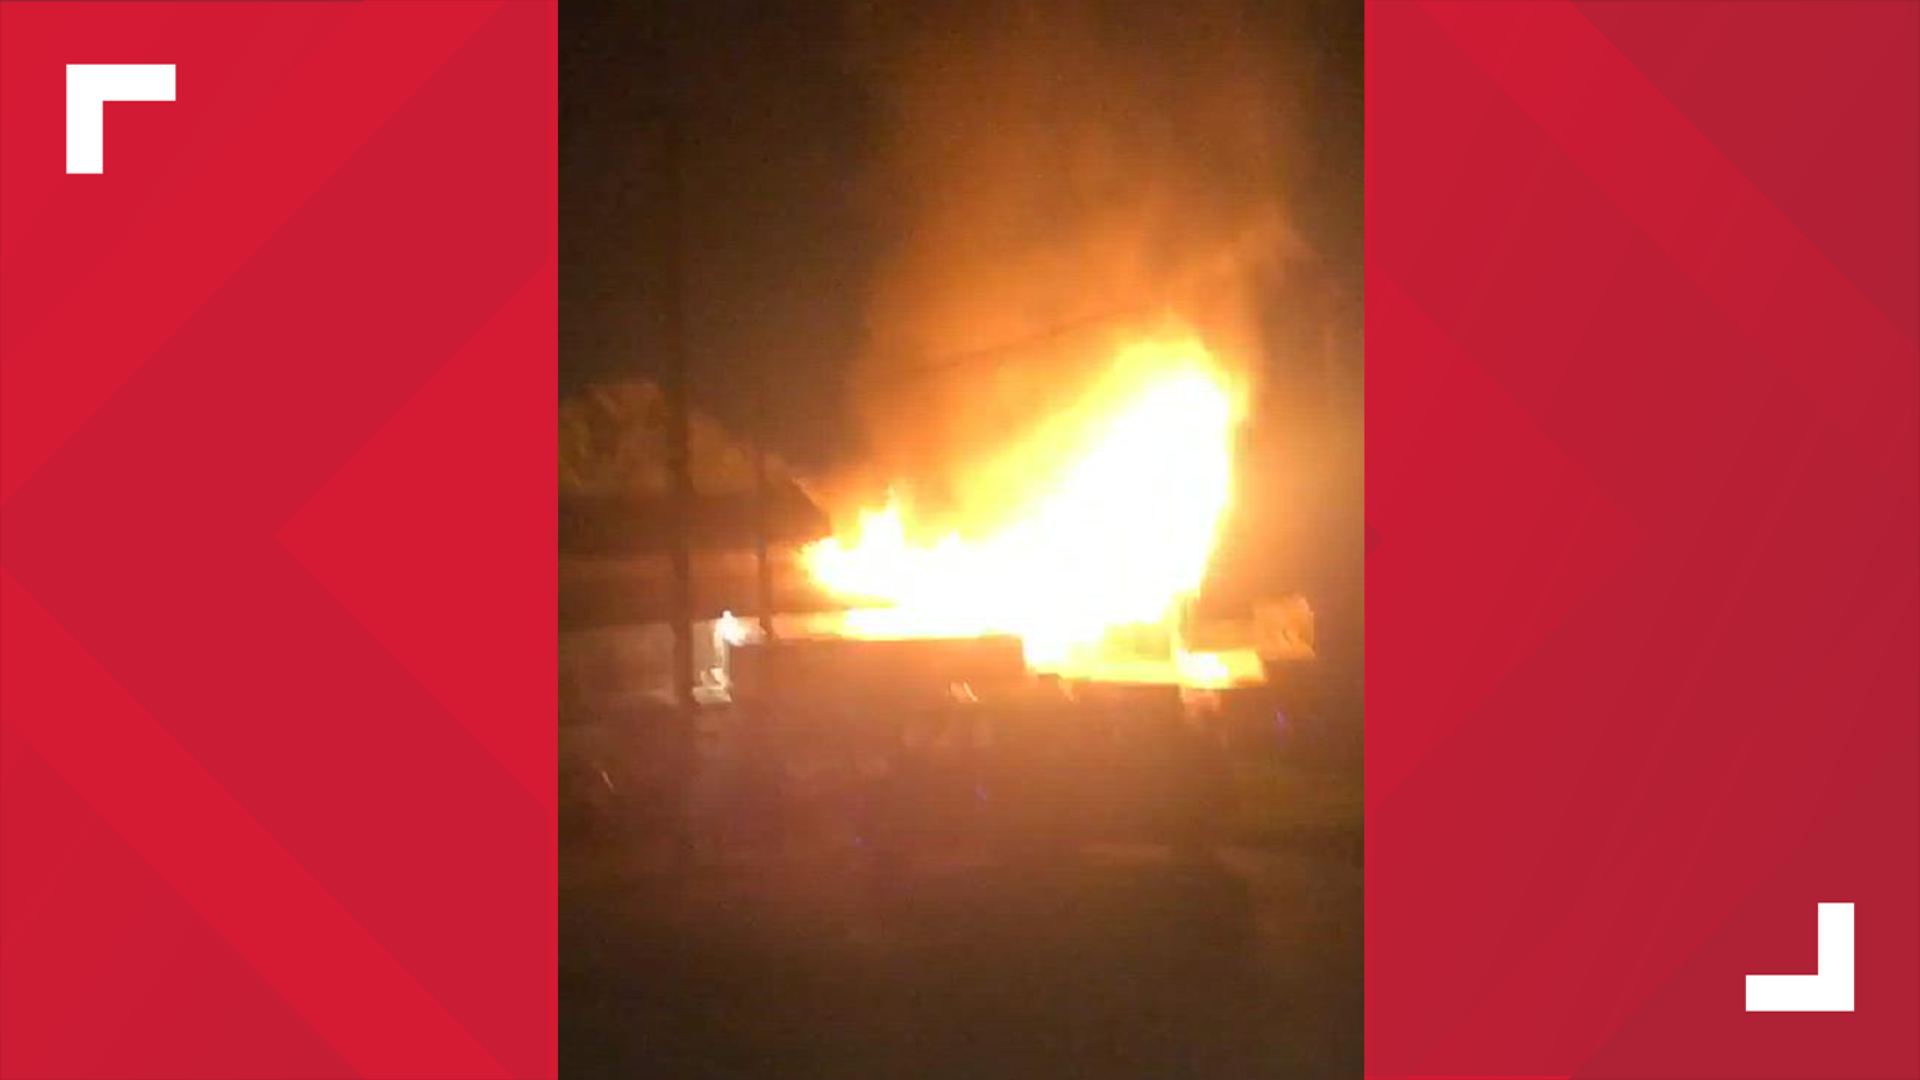 The call came in around 12:31 a.m. for a fire in Cumberland County.